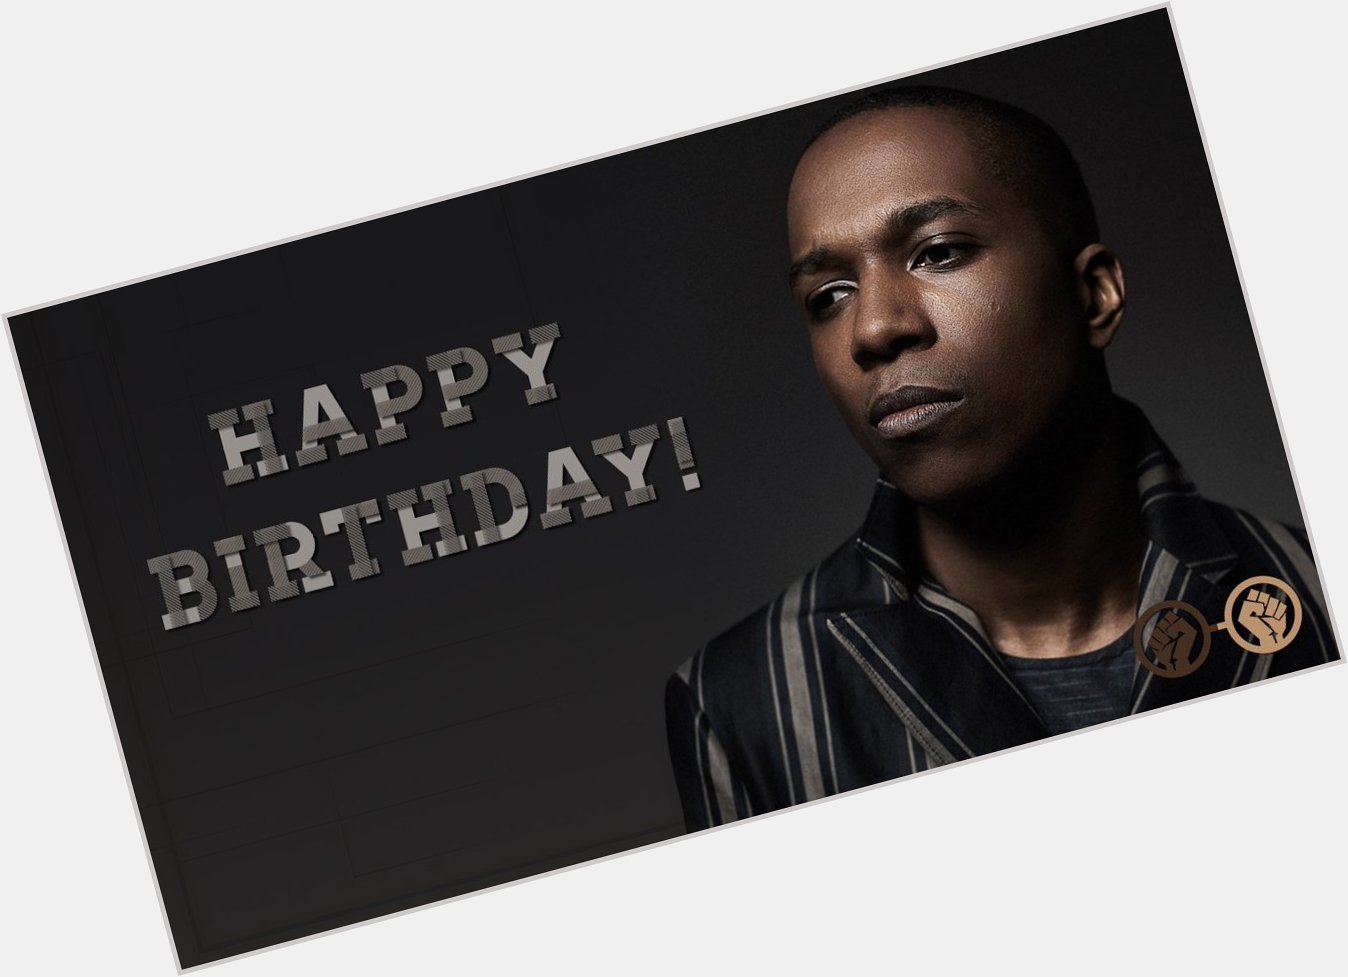 Happy birthday to, Leslie Odom Jr.! The talented actor and singer turns 37 today. We wish him all the best! 